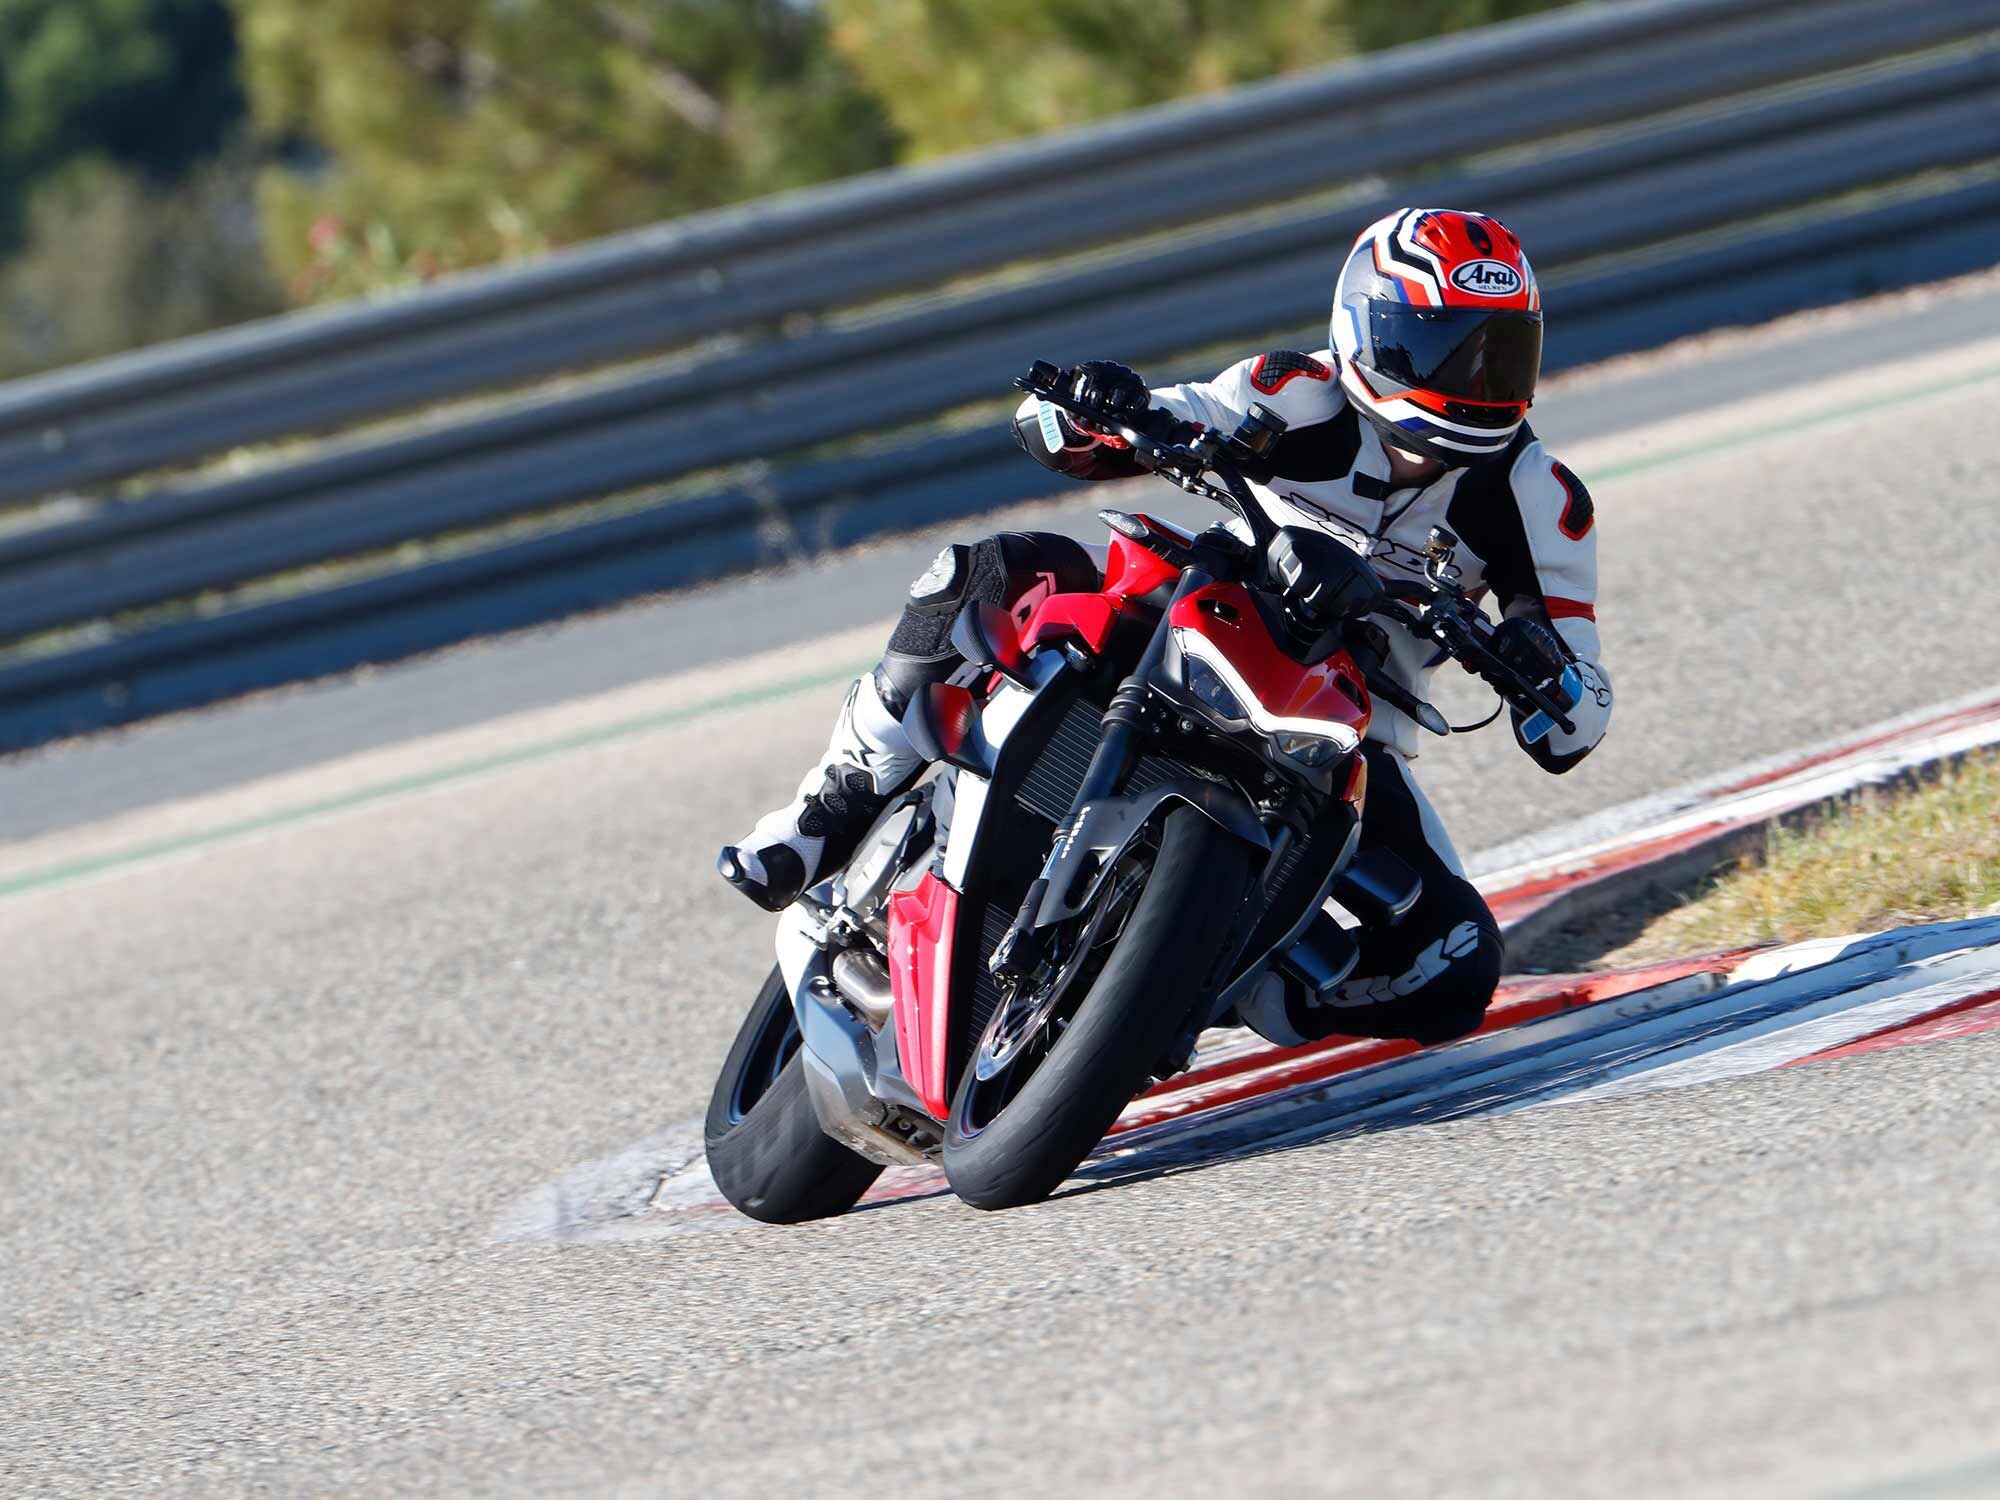 To properly sample the all-new 2022 Ducati Streetfighter V2, Cycle World jet-set to Spain to put it through its paces. Testing included a half day lapping at Circuito Monteblanco and the rest ripping through the mountains outside of Seville.